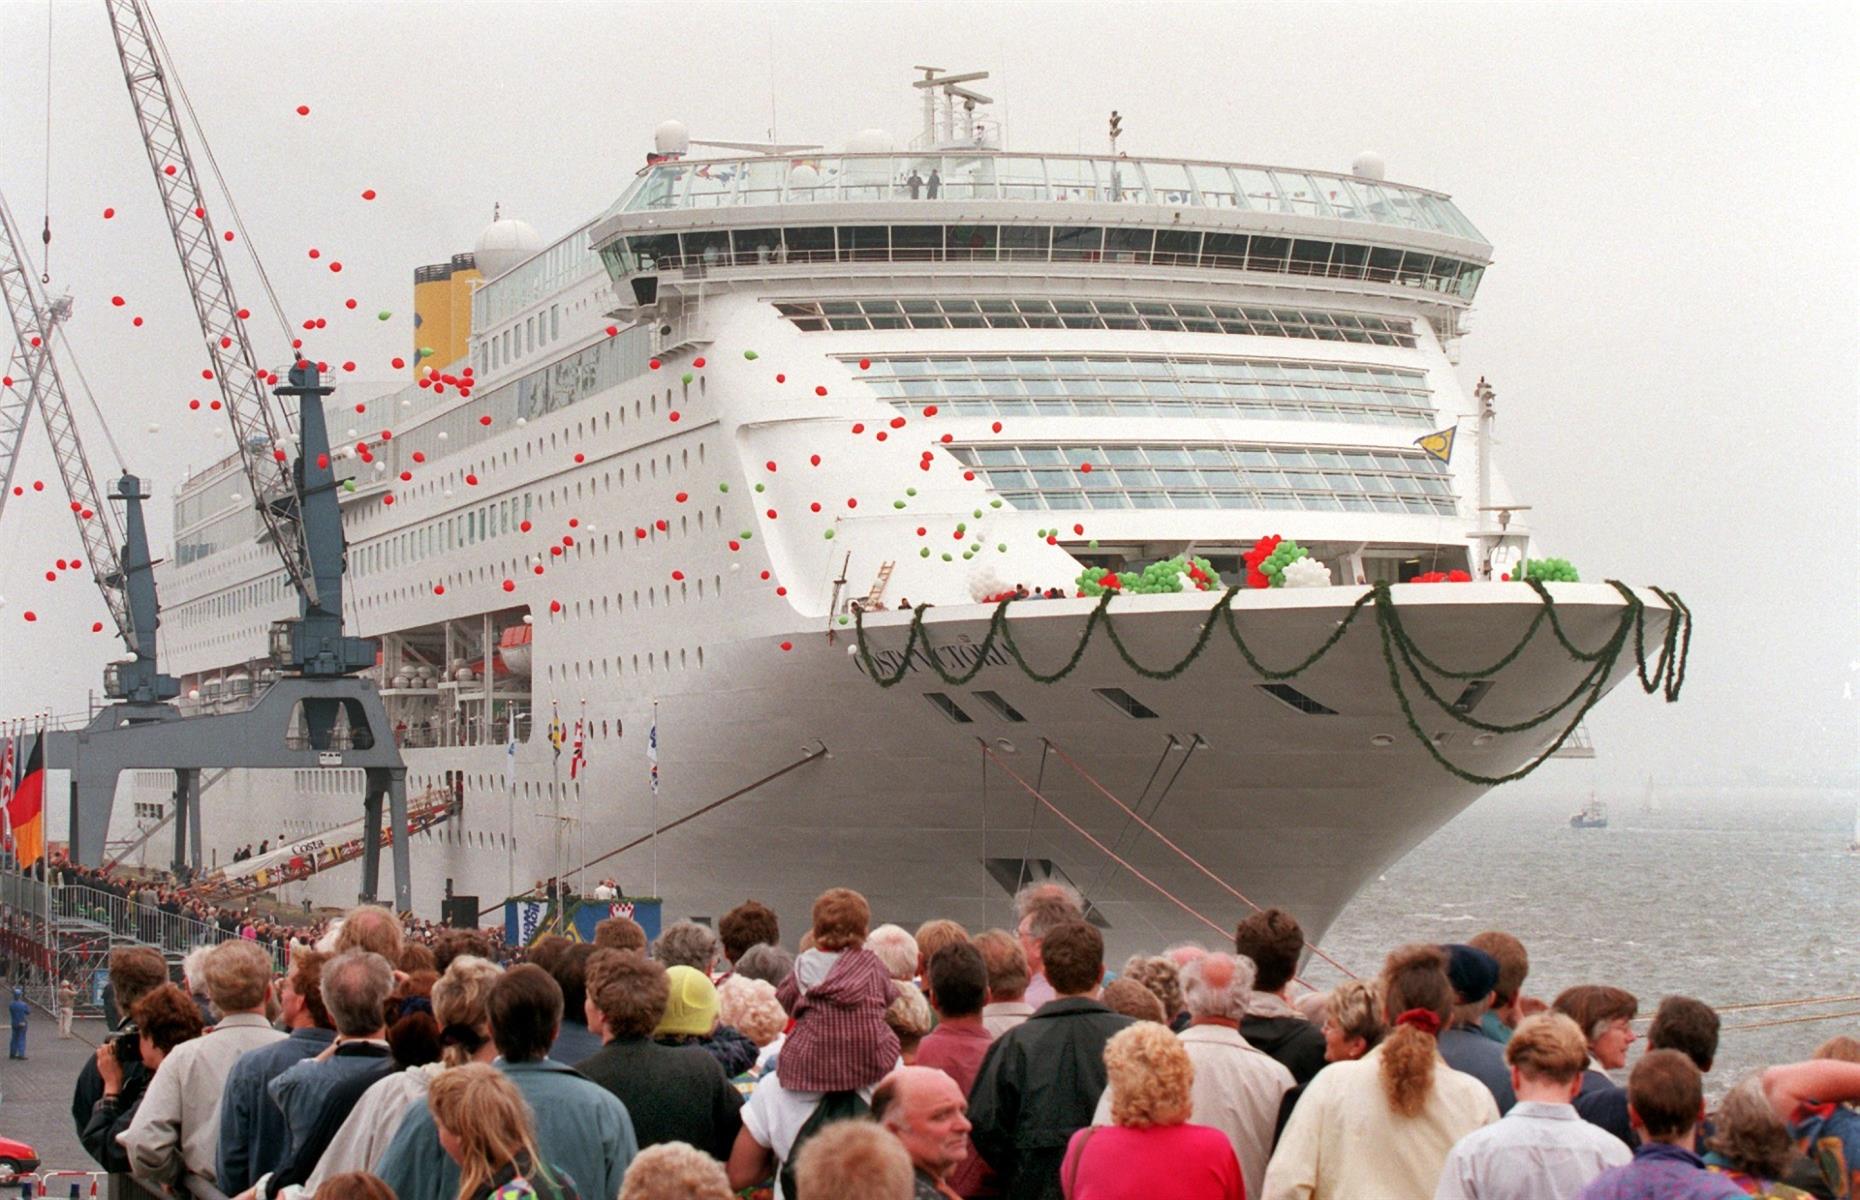 Distinctively designed with rows of windows at the front and a multi-story observation lounge, the 2,394-passenger Costa Victoria was built in 1996 in a record time of 29 months. During service the ship spent a lot of time in Asia, and had an Italian-inspired refit in 2013.